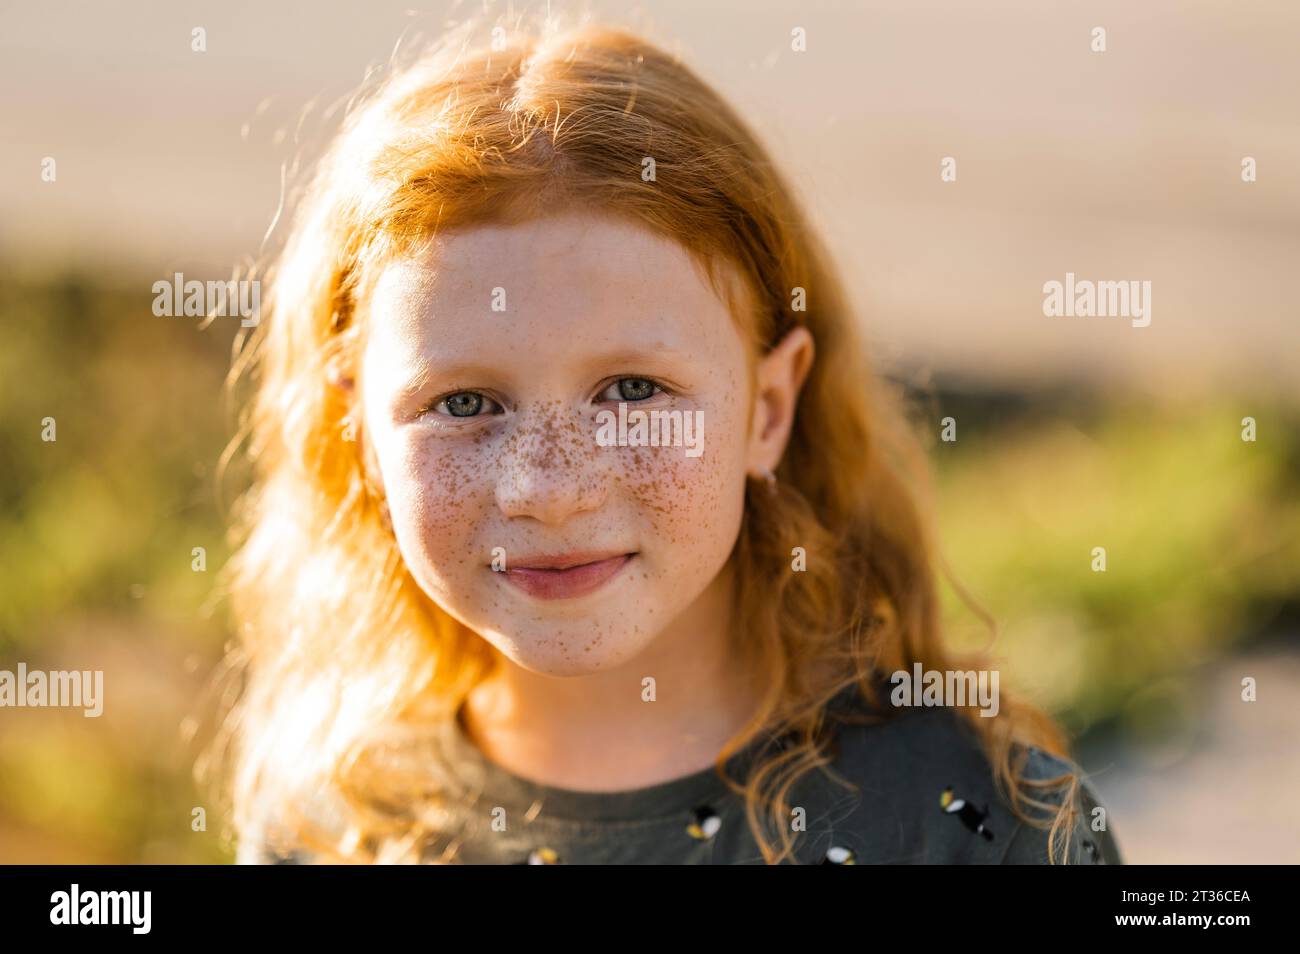 Smiling redhead girl with freckles Stock Photo